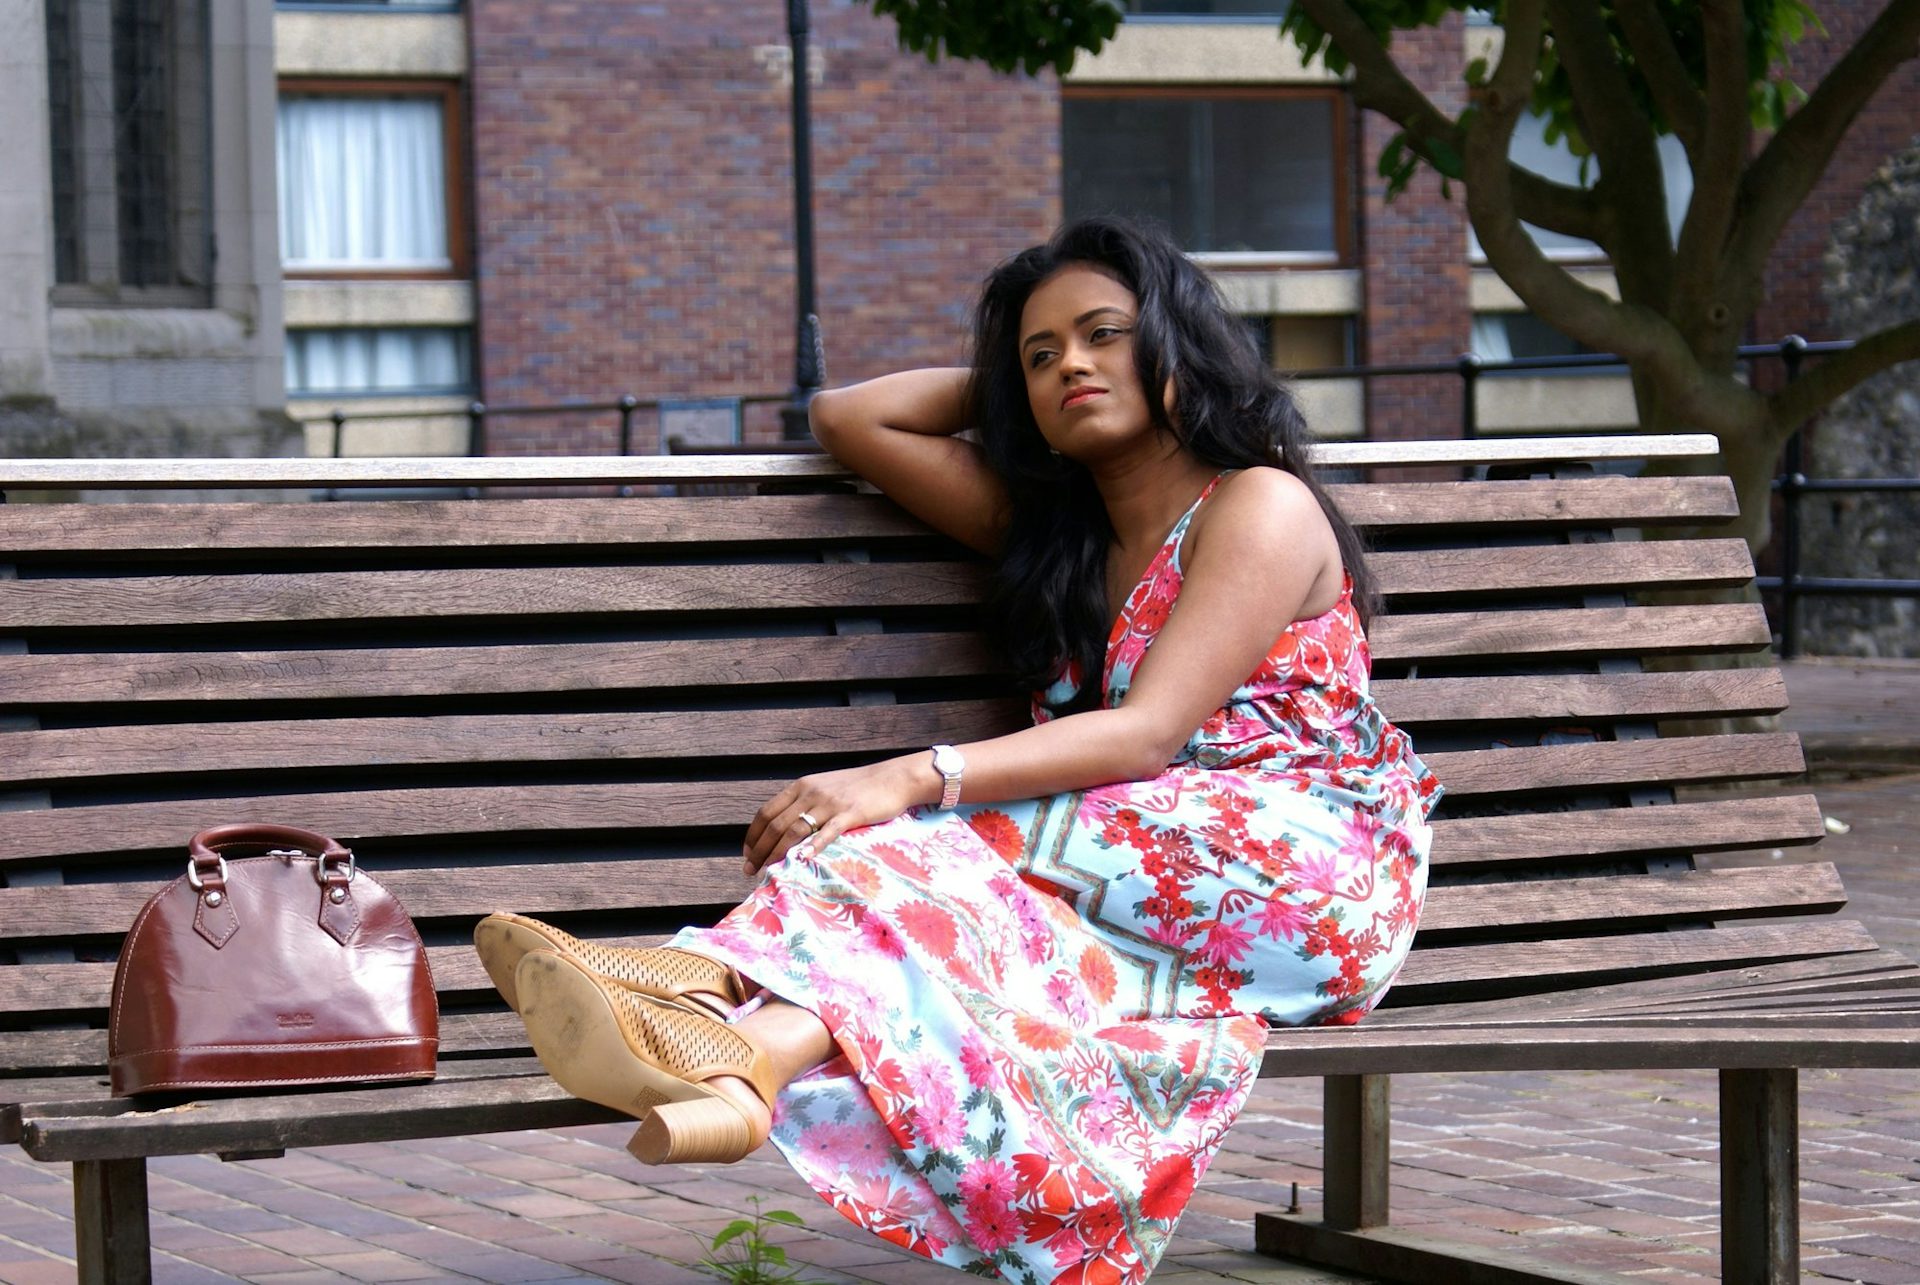 Sachini wearing a colourful dress setting on a bench